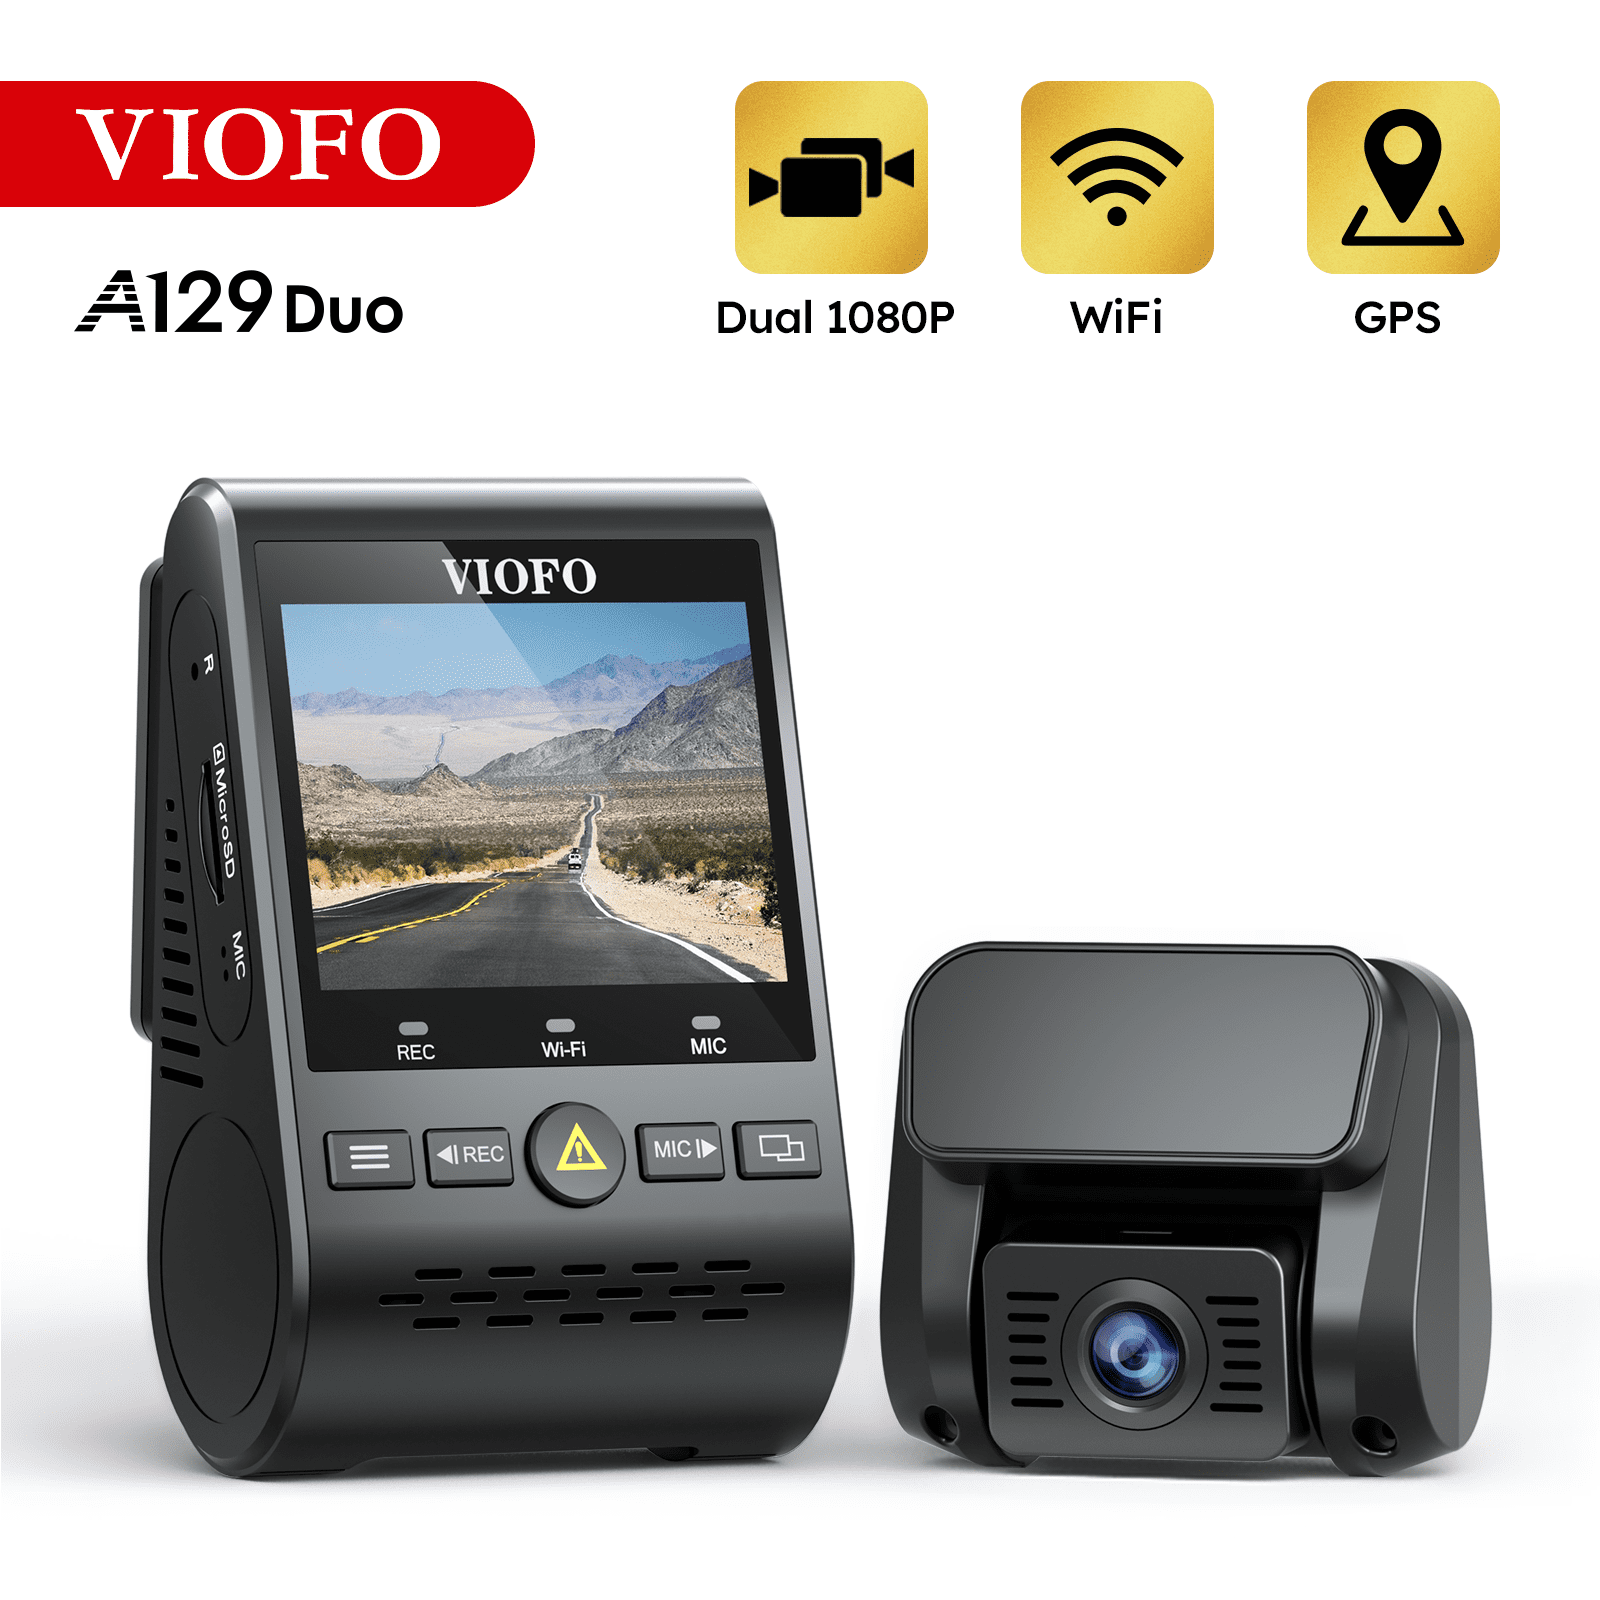 VIOFO A129 Duo Dual Lens Dash Cam 1080P Car Camera with GPS and Wi-Fi,  Parking Mode, Super Night Vision (Supports Only Wi-Fi 2.4GHz & 5GHz)